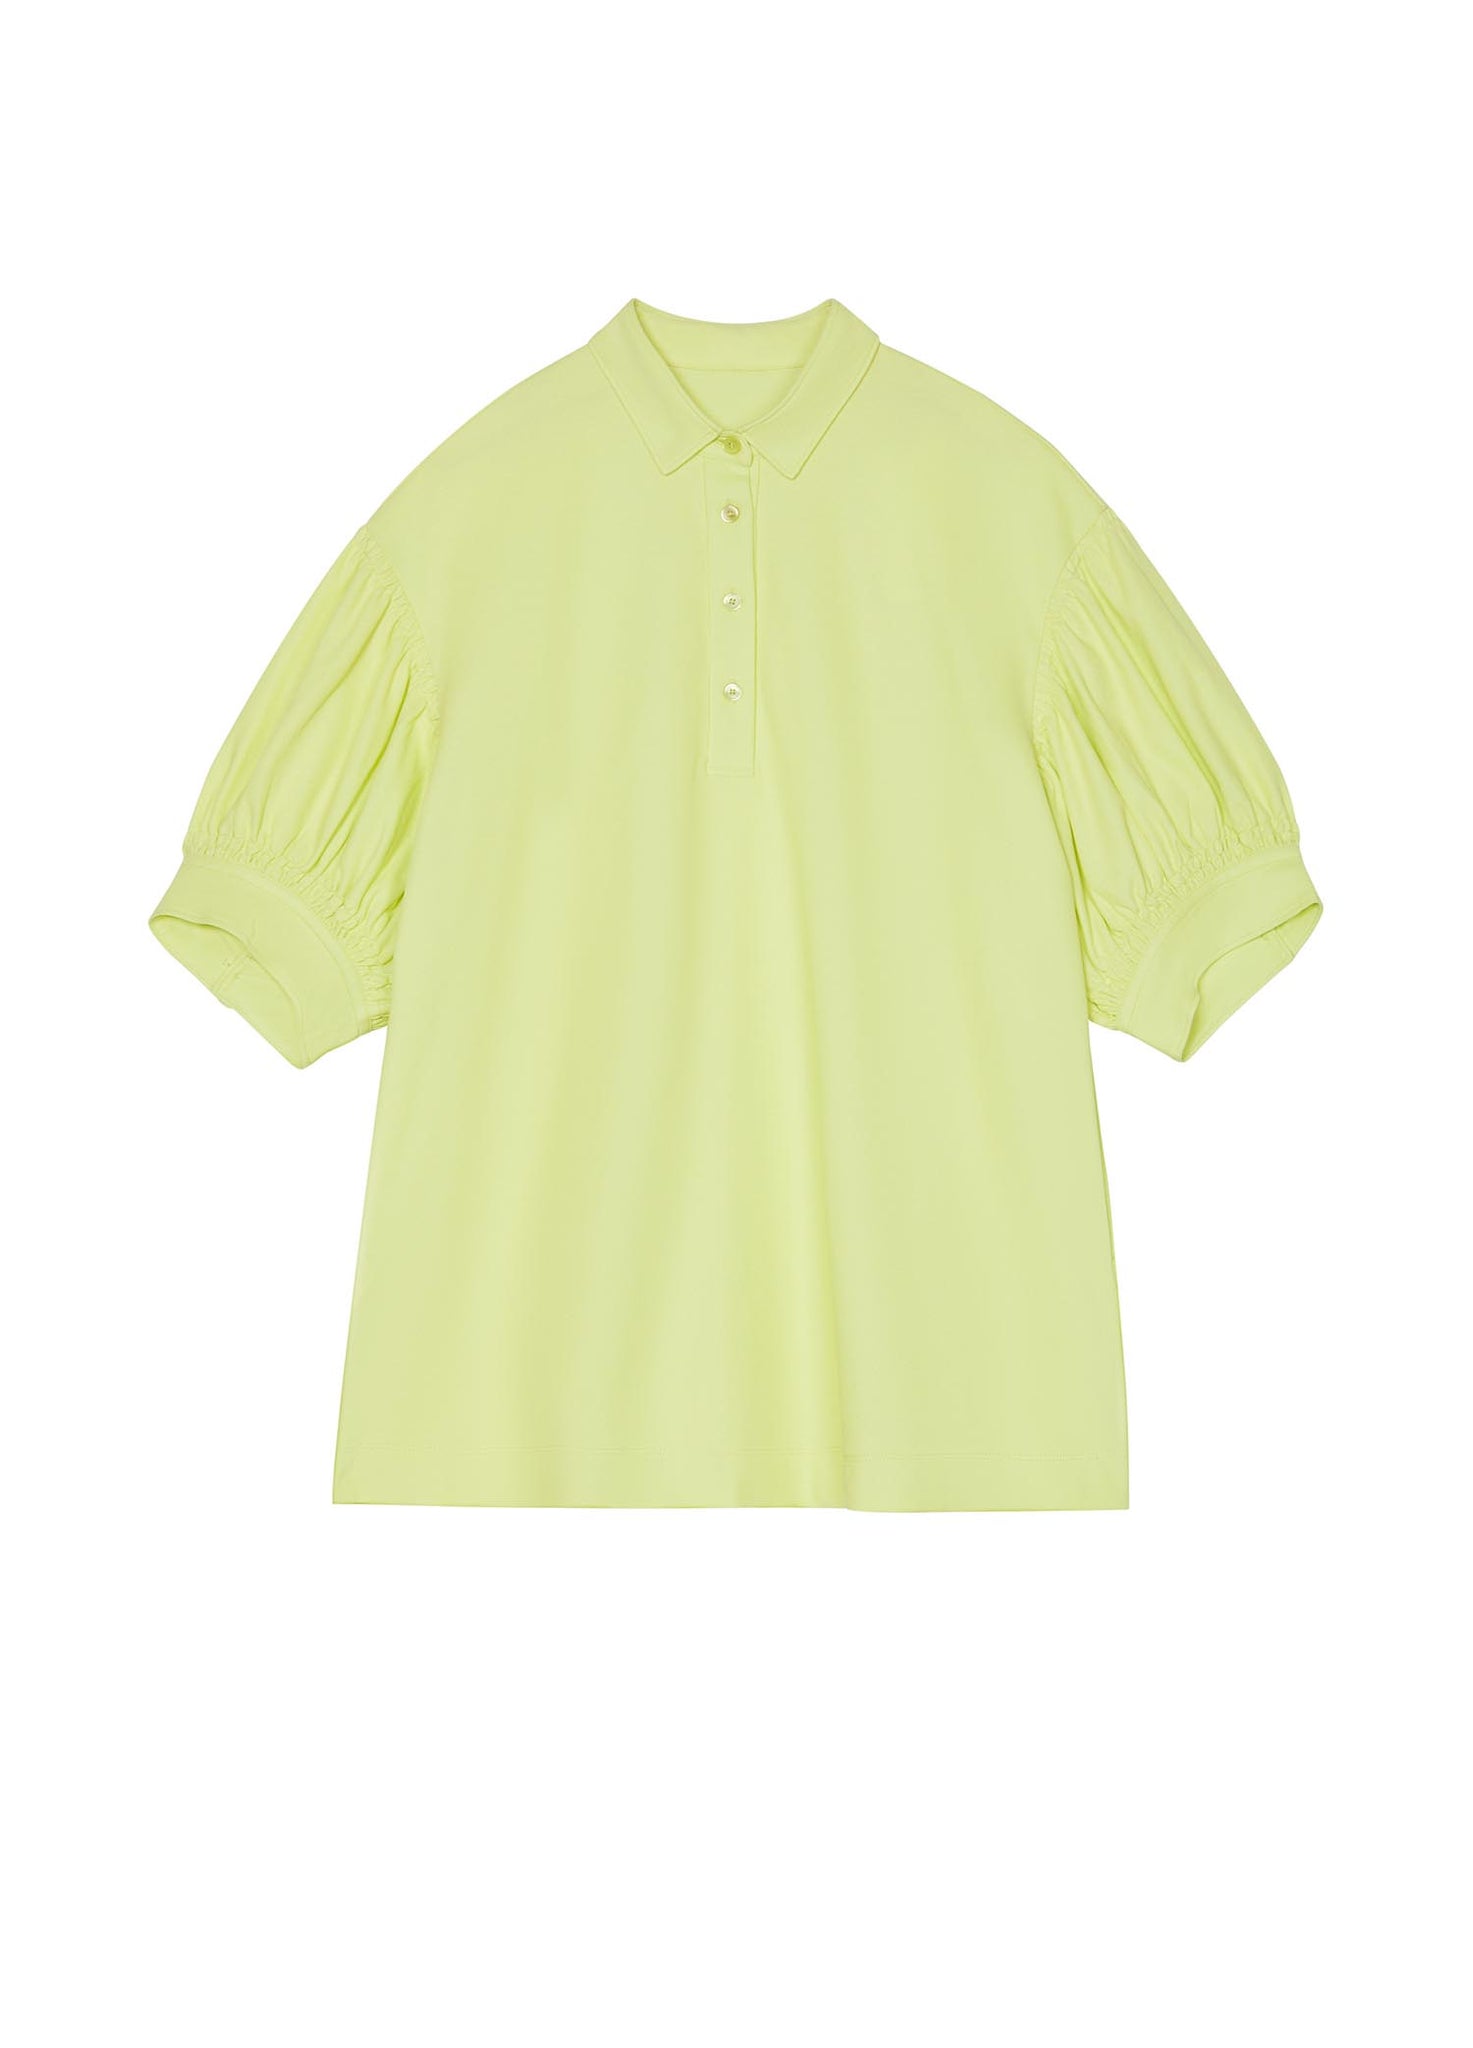 T-Shirt / JNBY Loose Fit Short Sleeve Polo Shirt (100% Cotton)